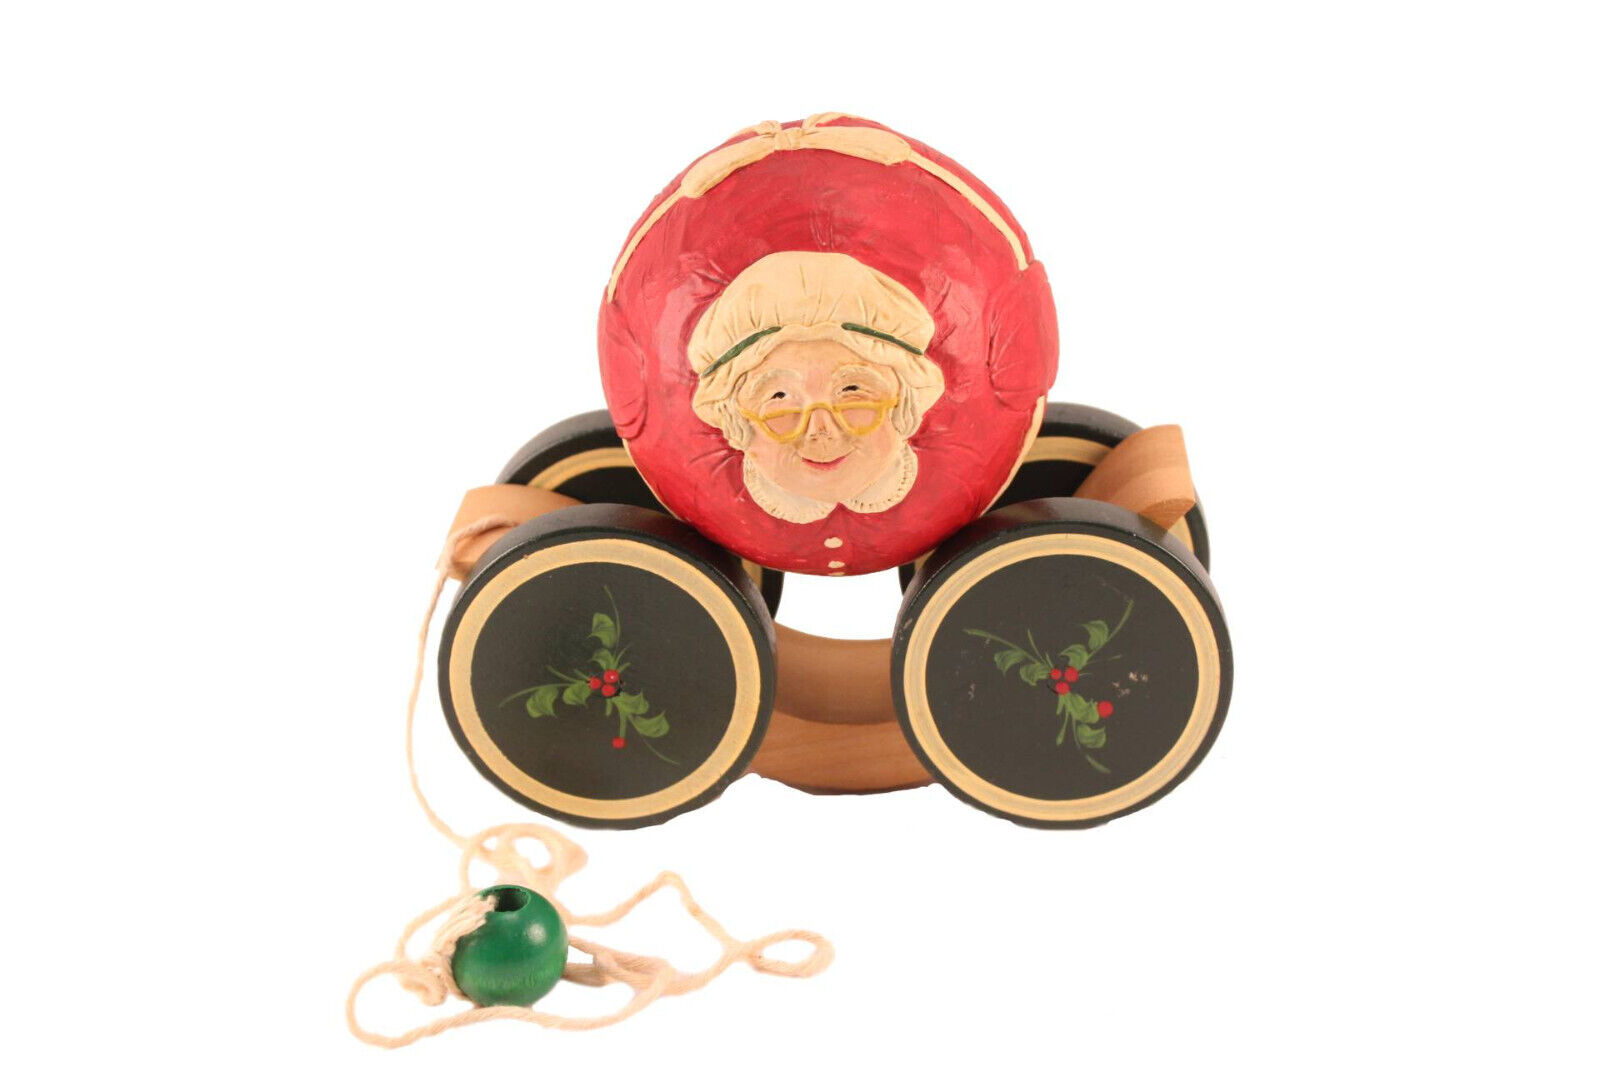 Briere Folk Art Pull Toy 1988 Mrs. Claus Ball Xmas Roly Poly Ball & Caddy Signed